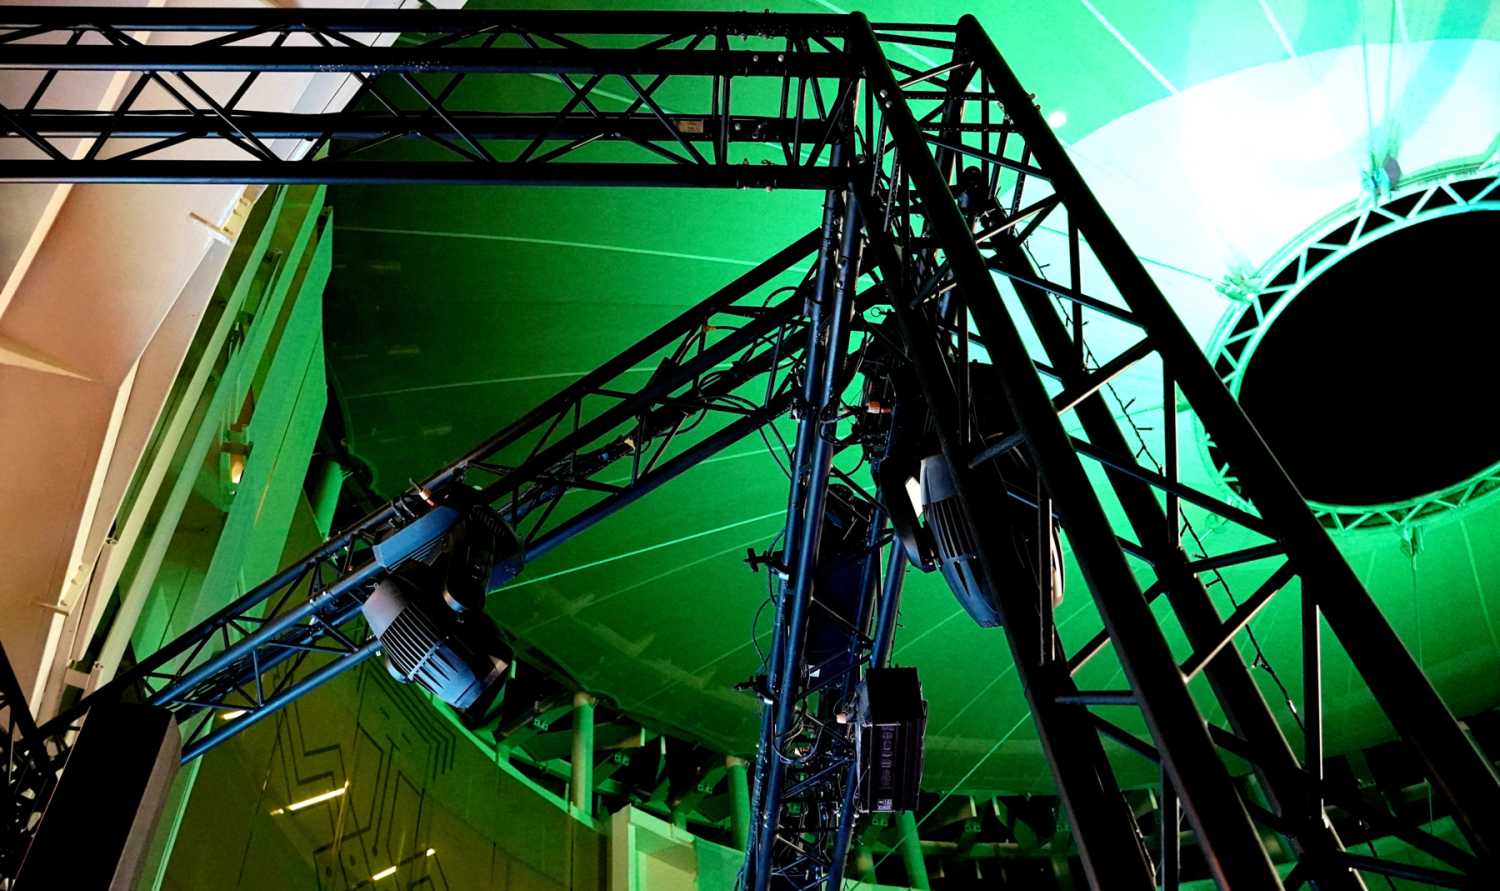 Fantek supplied rigging and structures in both the Spanish and Angola Pavilions